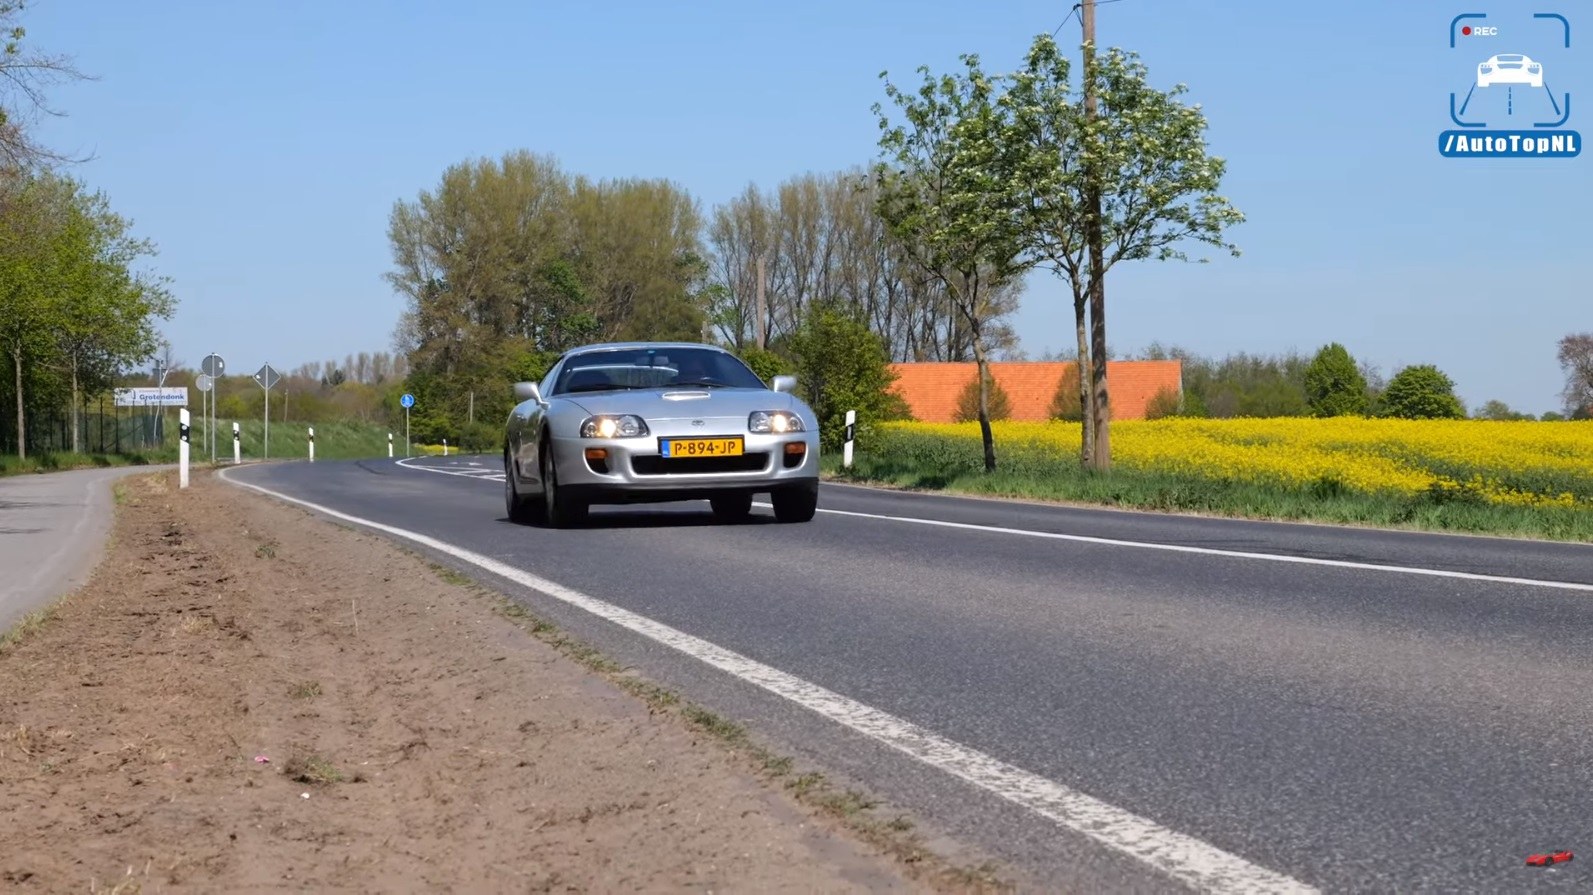 FACTORY NEW* Toyota Supra MK4  250km/h REVIEW on AUTOBAHN by